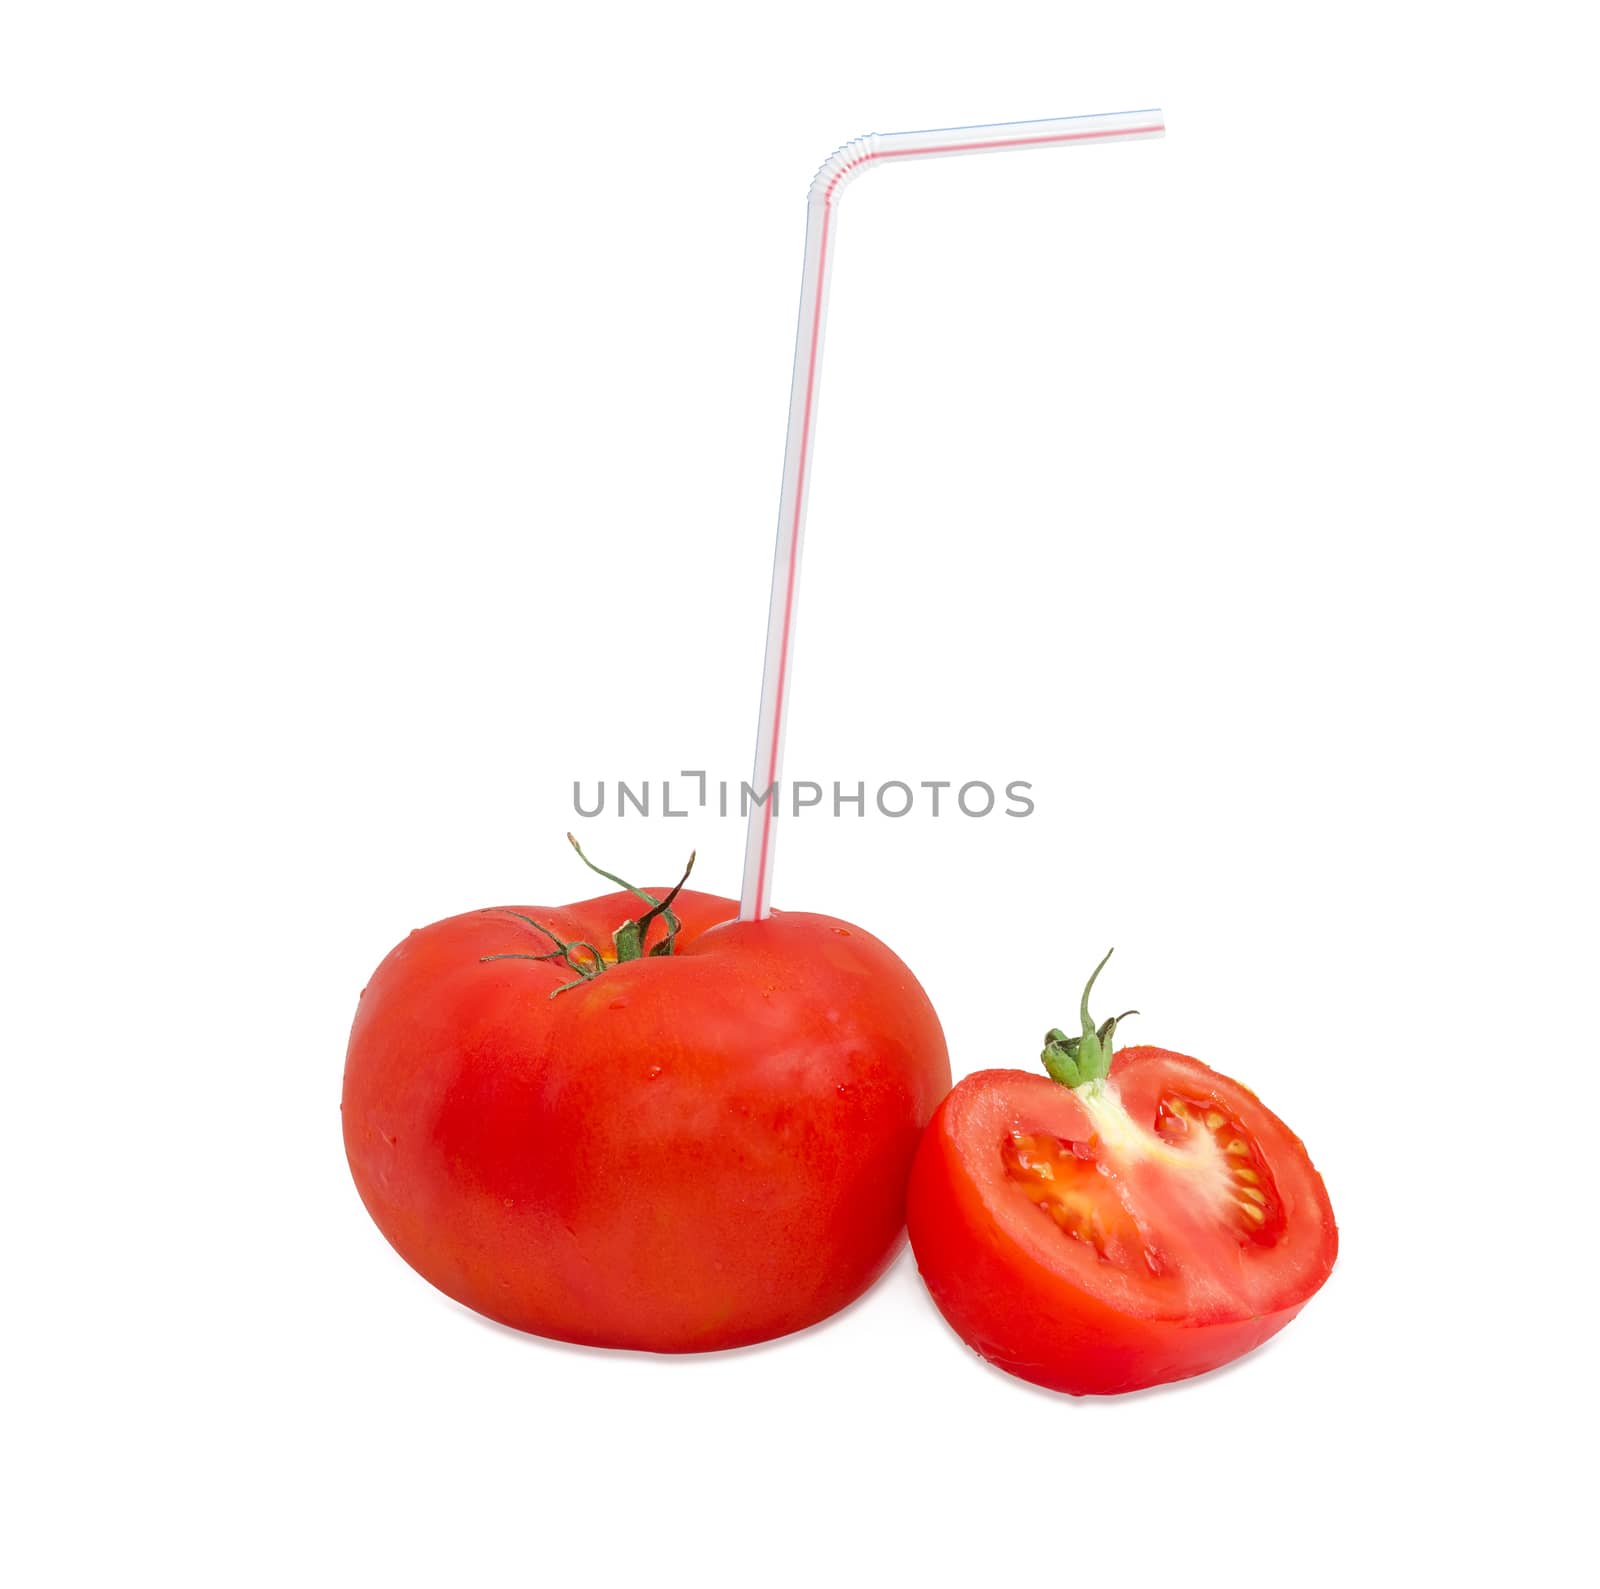 Big fresh ripe tomato and bendable drinking straw inserted into it and half of other tomato on a light background
